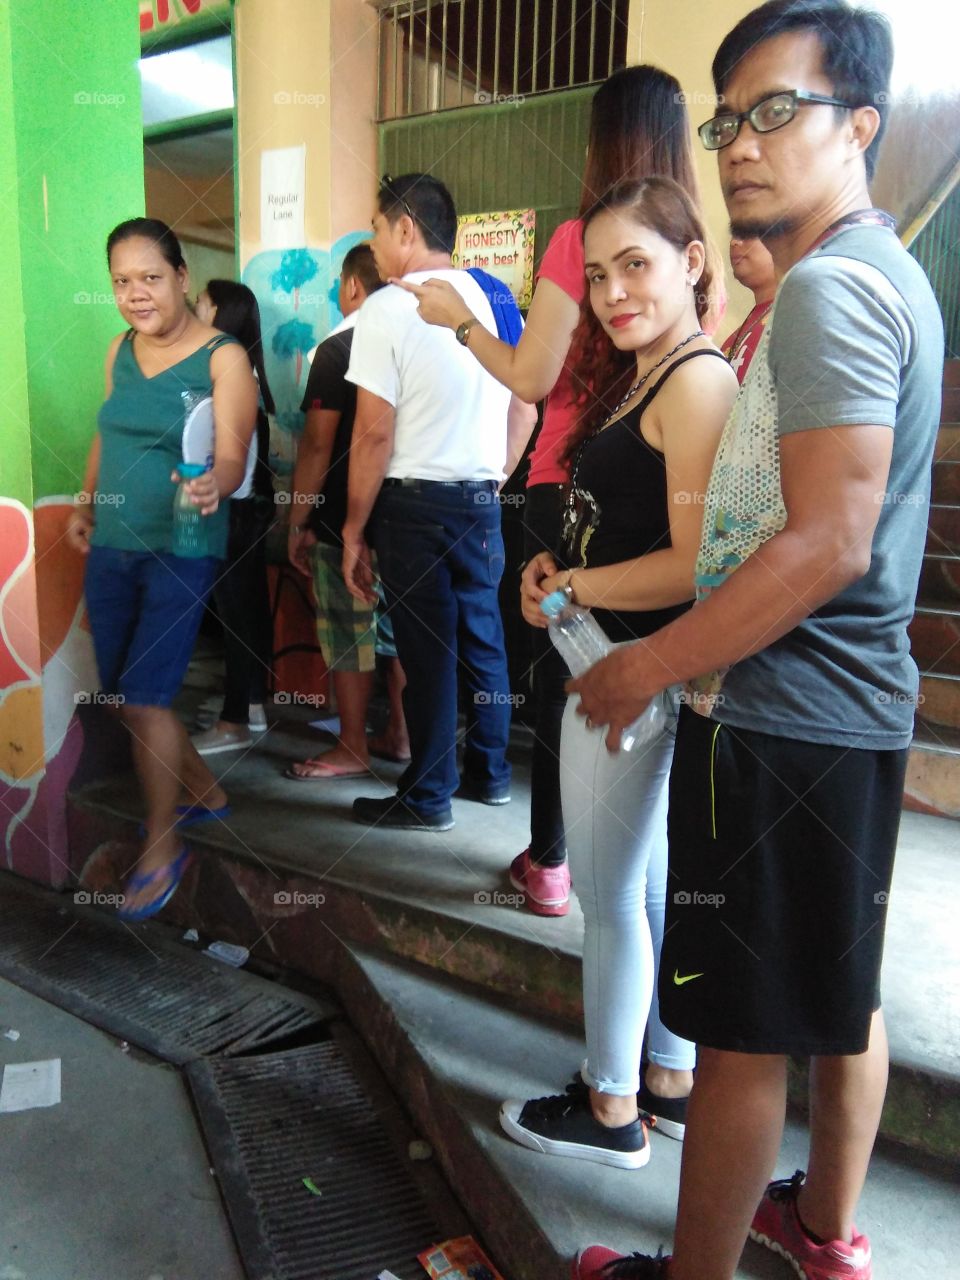 election day in the philippines